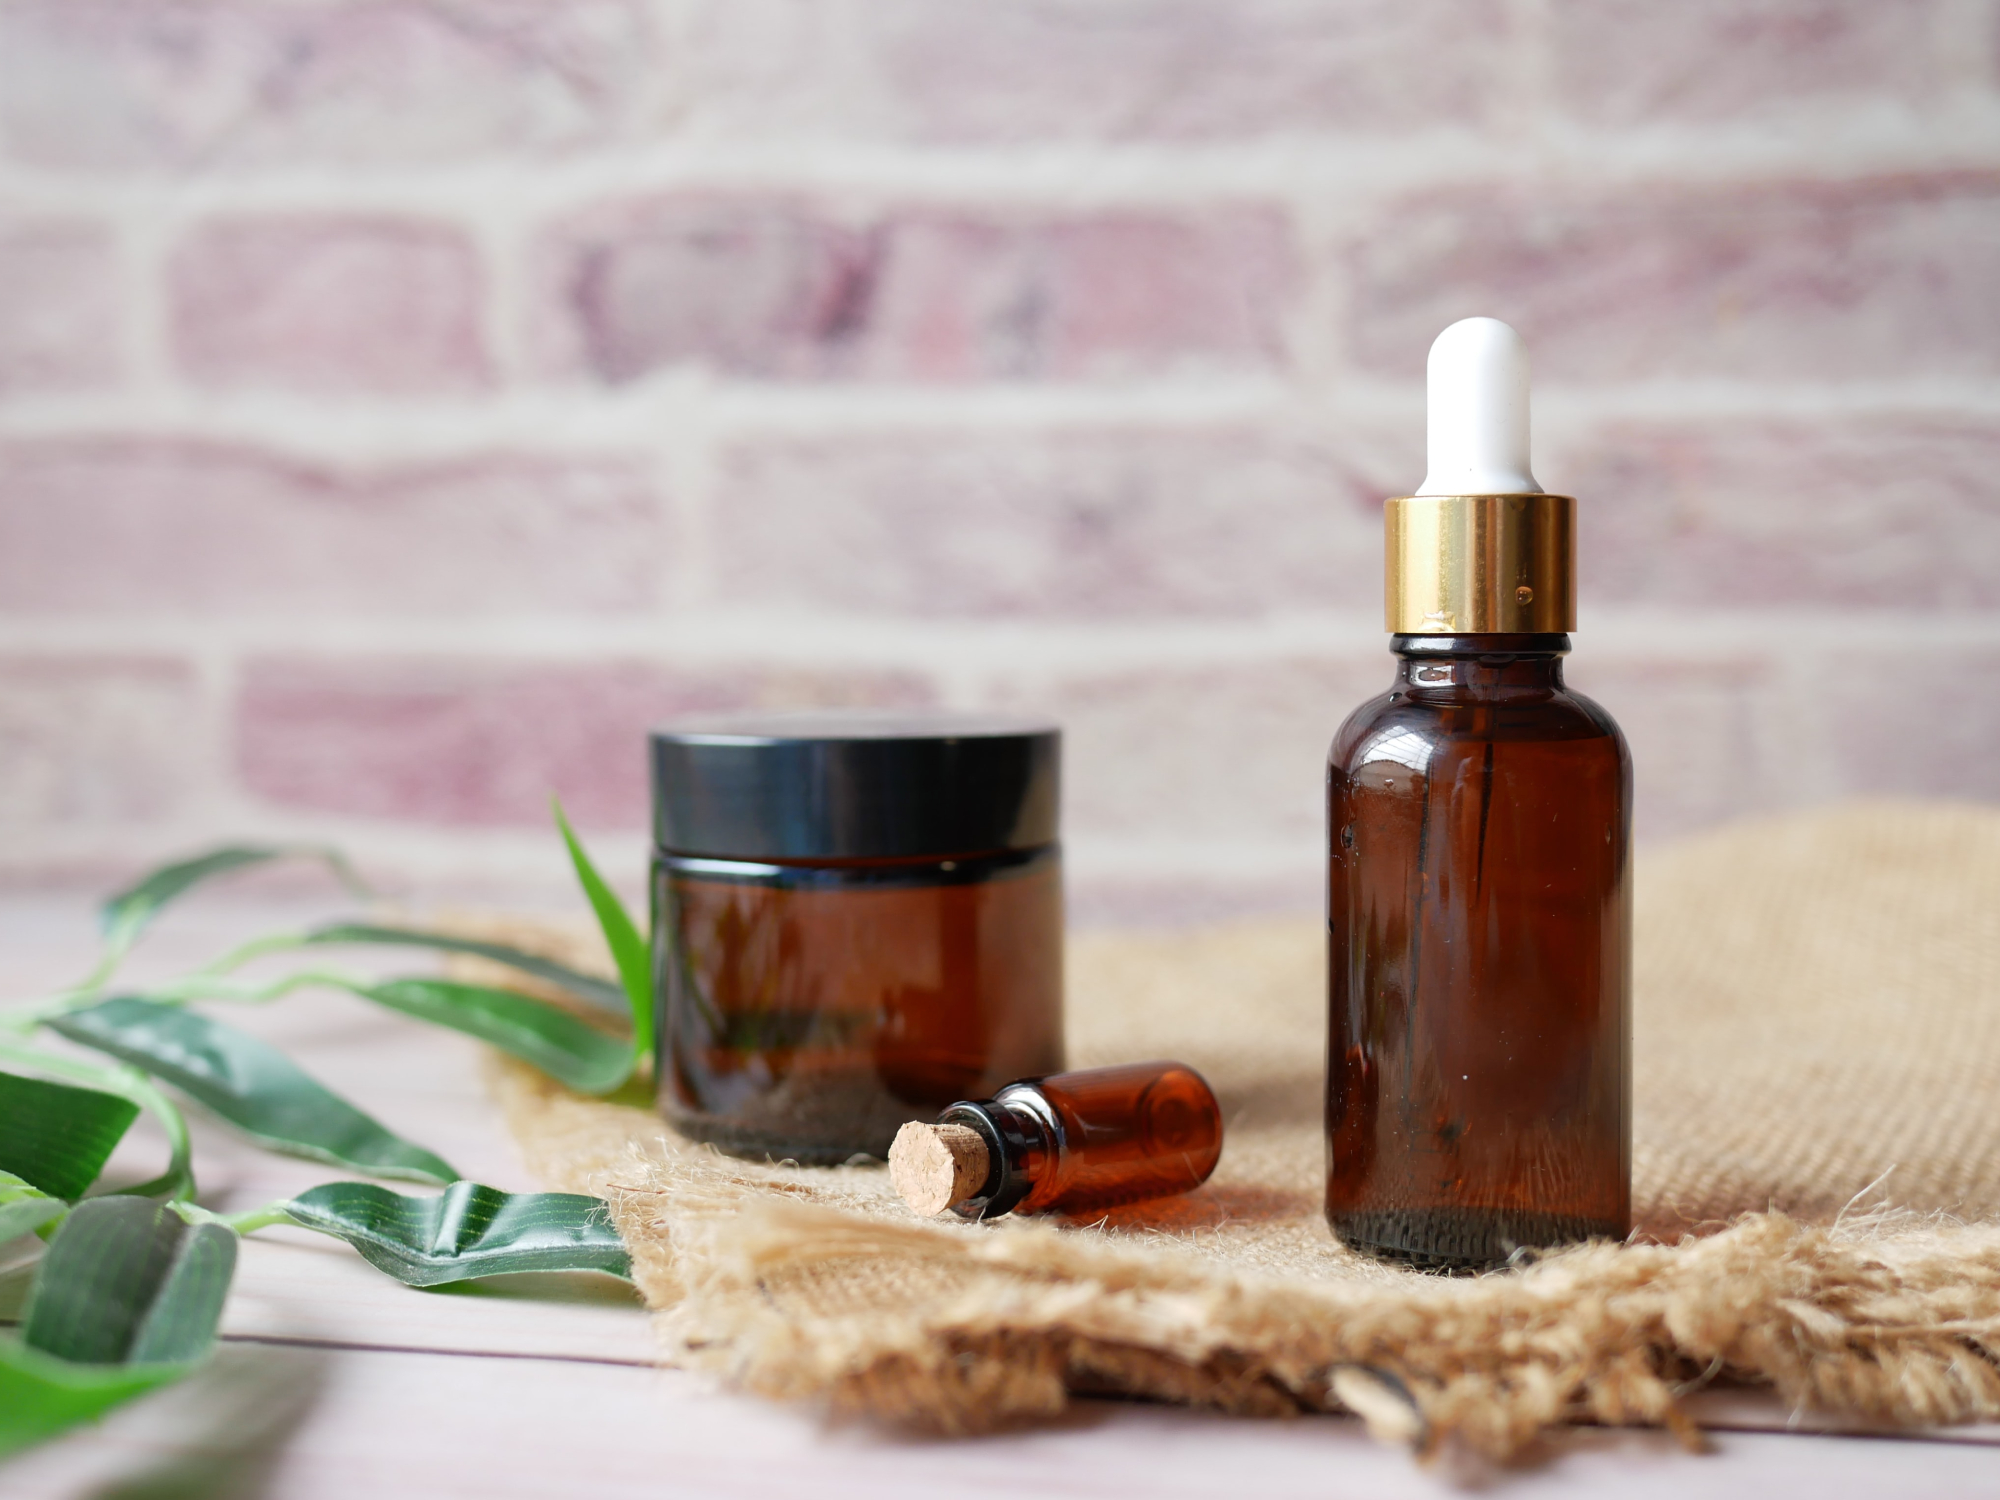 Essential safety tips for using essential oils